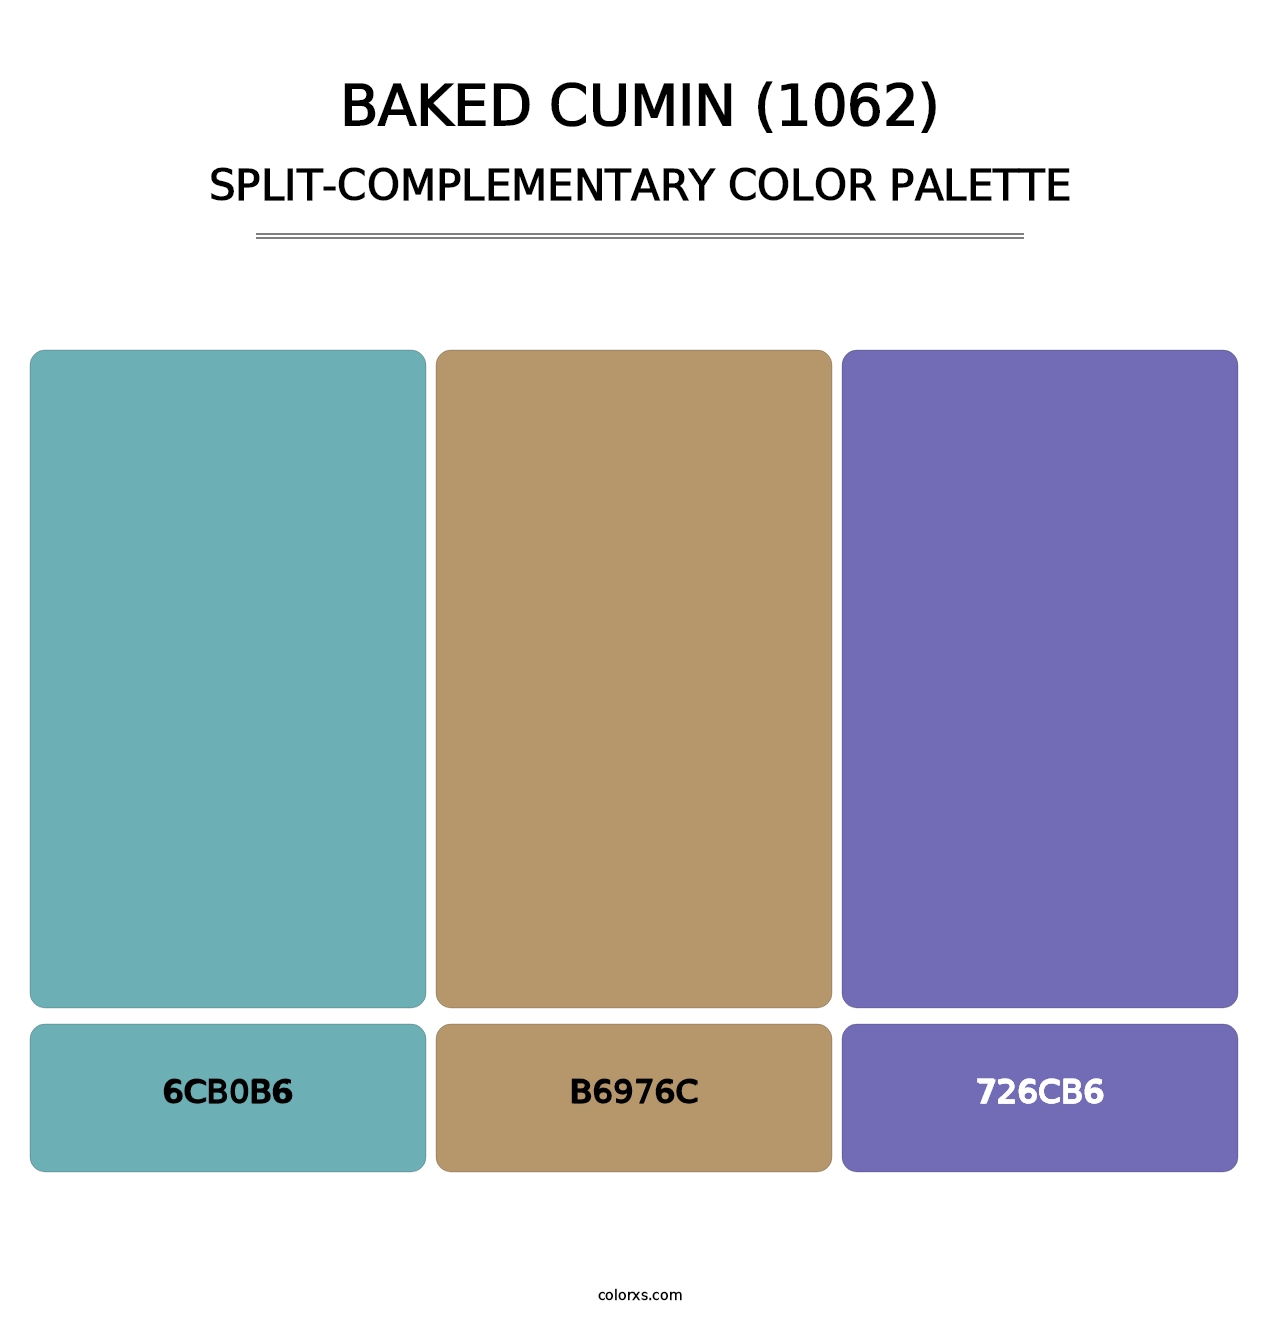 Baked Cumin (1062) - Split-Complementary Color Palette